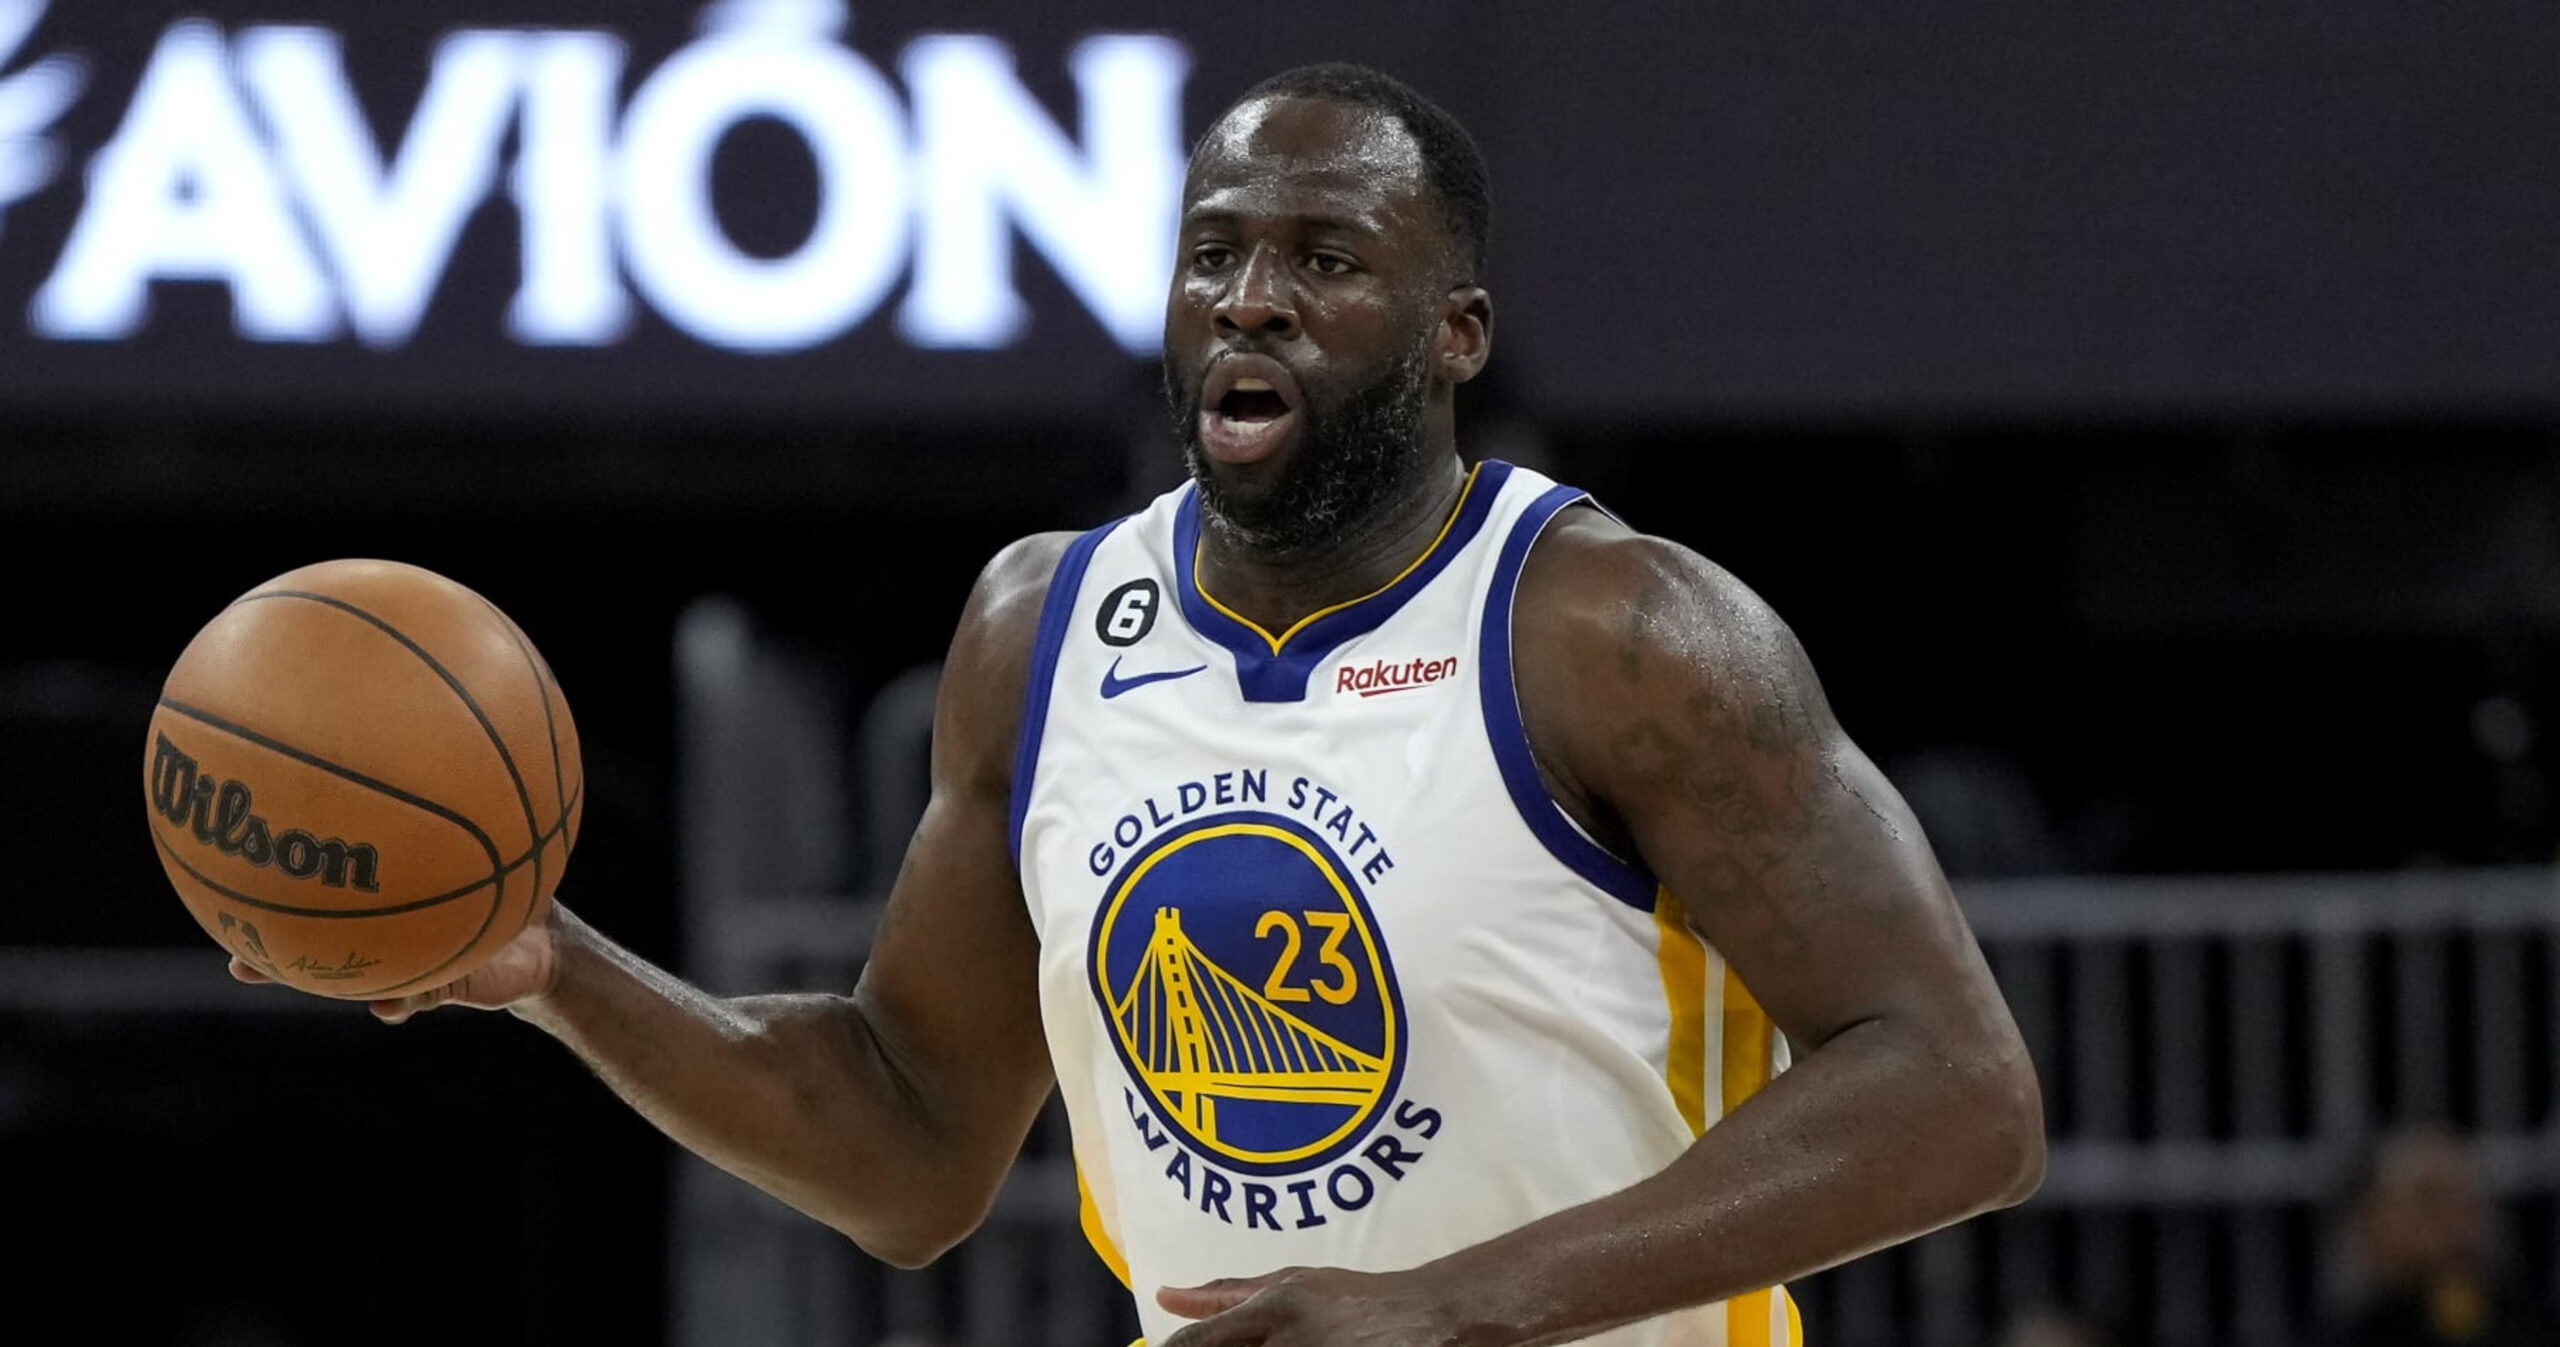 Draymond Green, Golden State Warriors Rumors: Draymond Green to the Philadelphia Sixers is a Huge Possibility